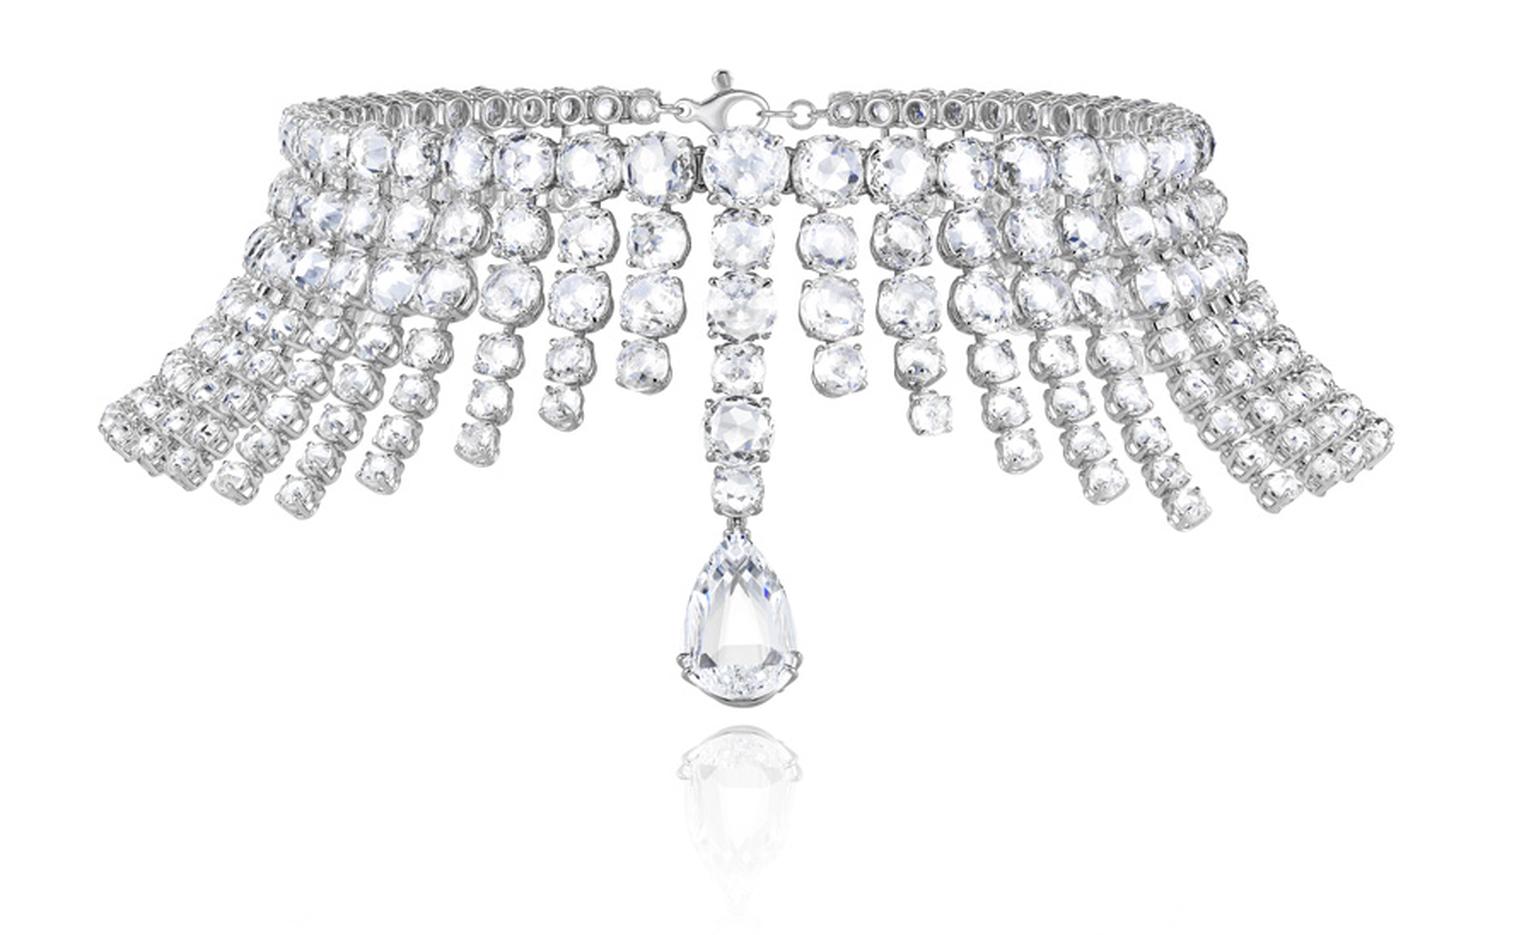 Chopard-Diamond-Necklace-from-the-Red-Carpet-Collection-2013.jpg